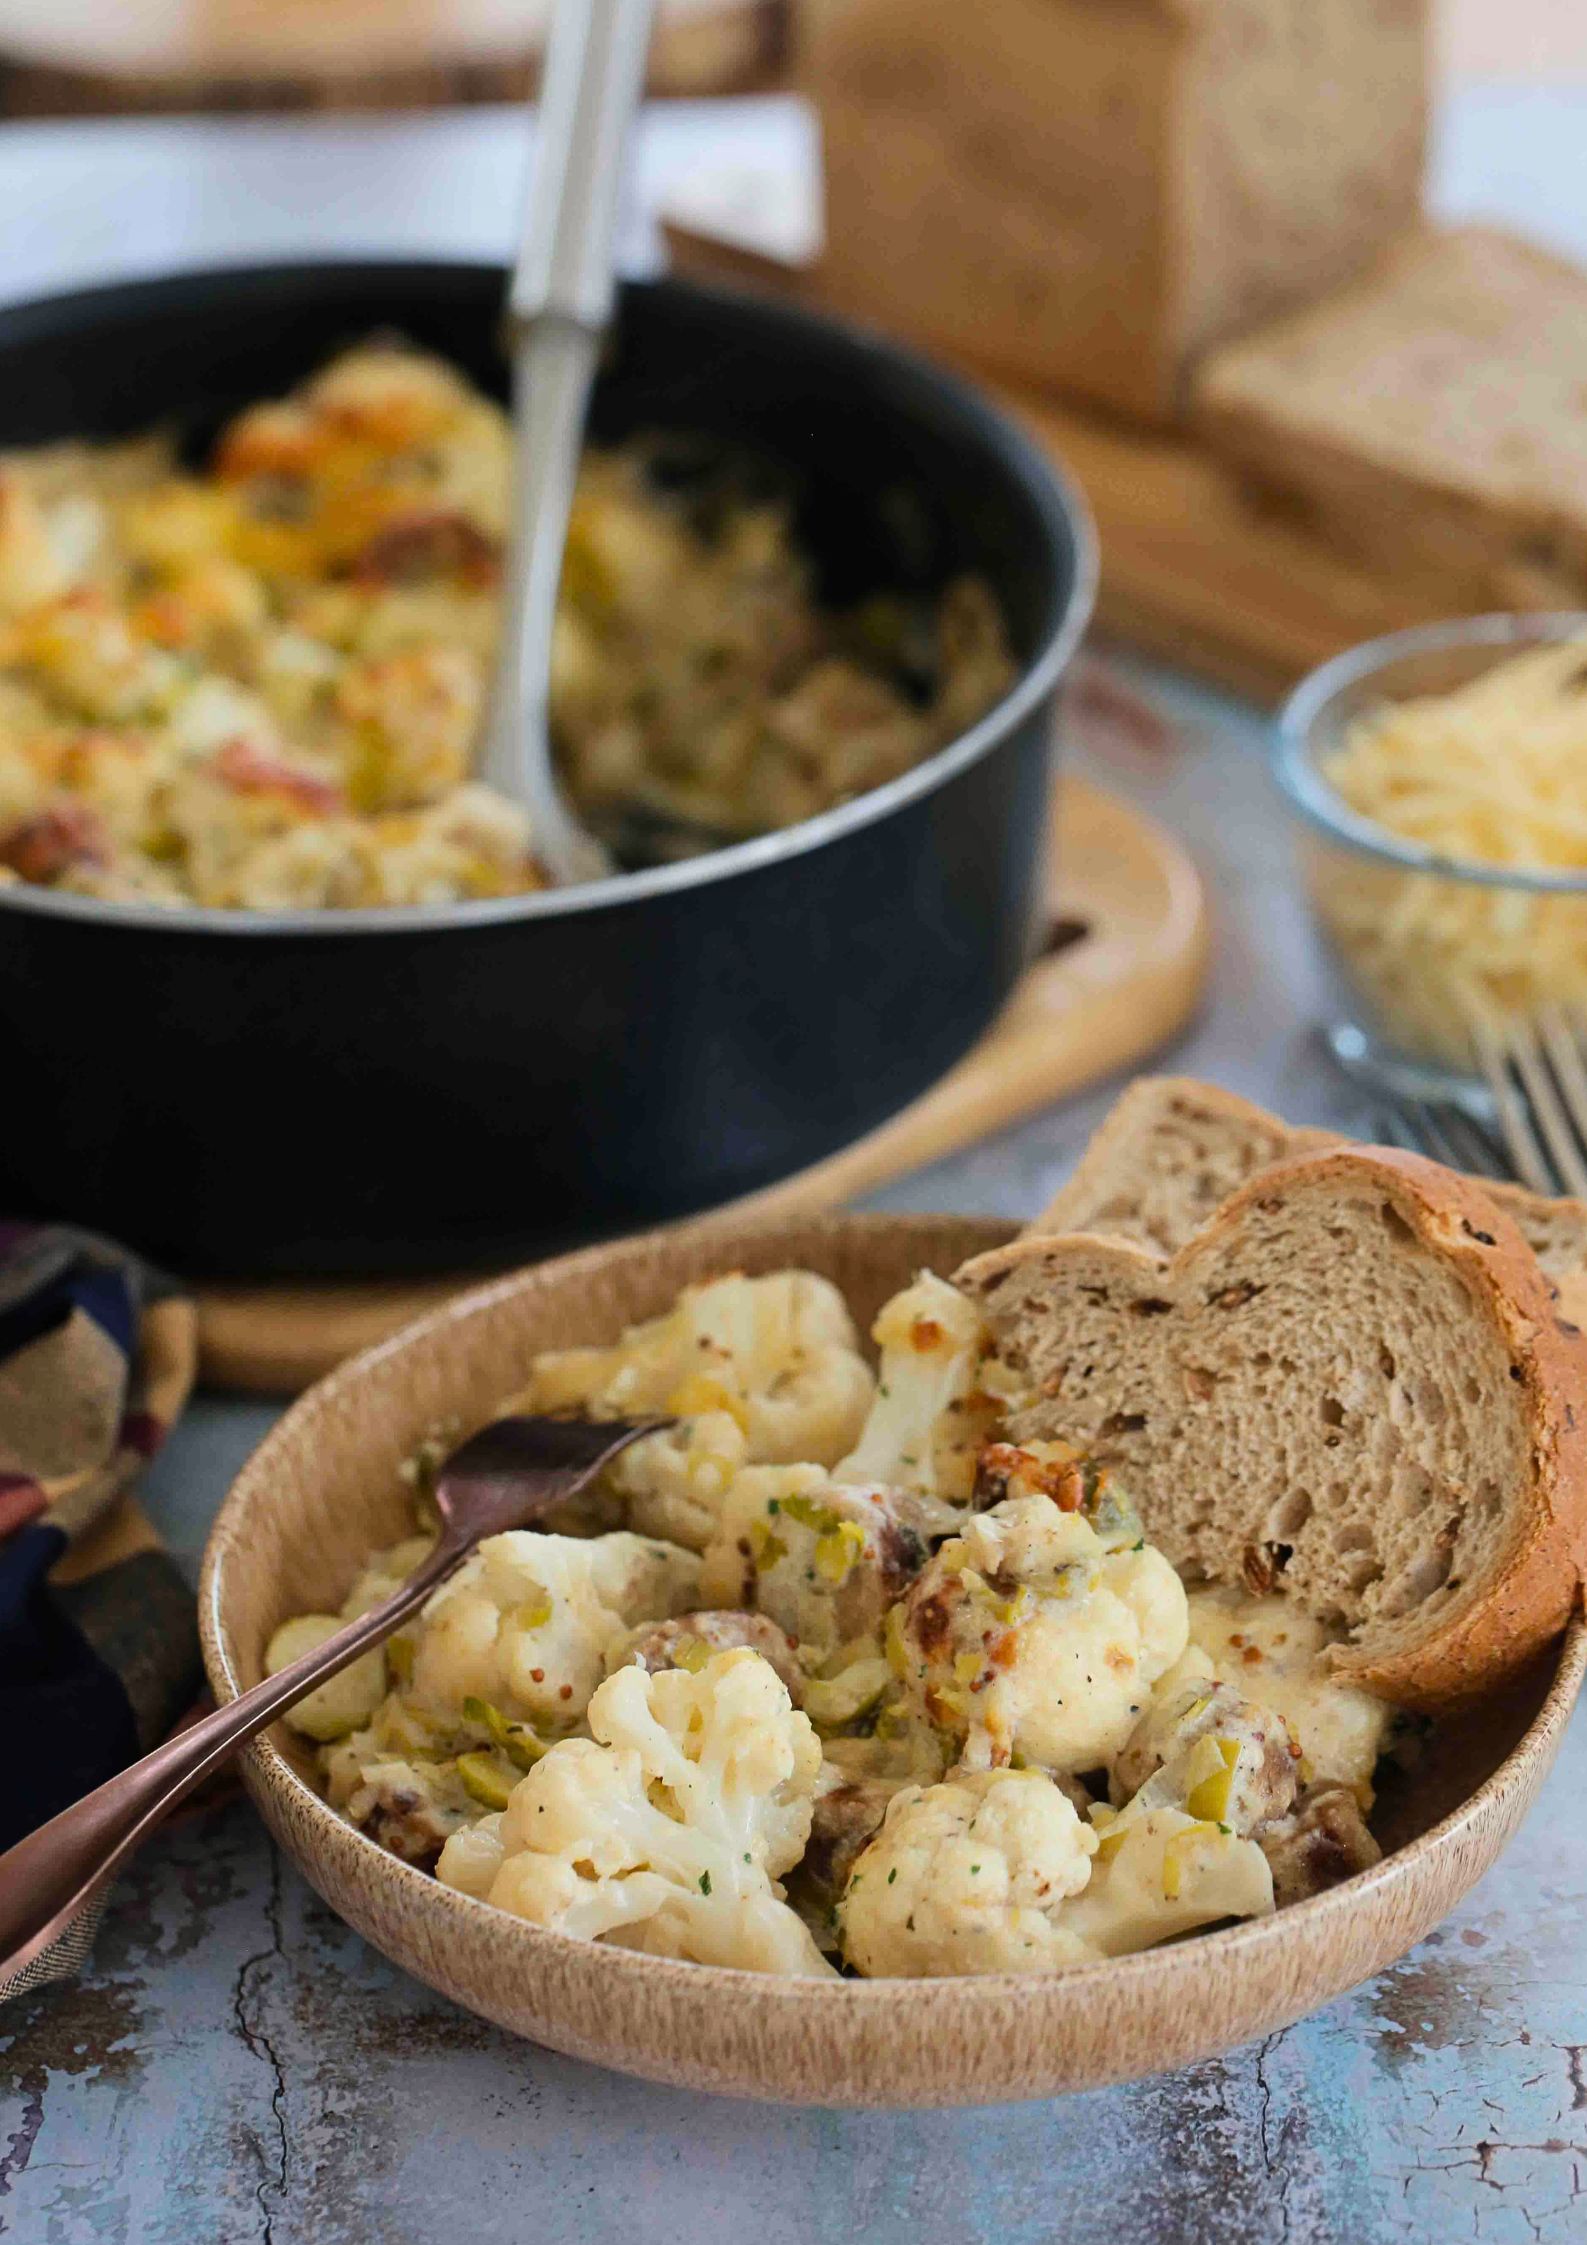 Baked until crisp and bubbly, this vegan cauliflower cheese with leeks, sprouts and sausages is a whole meal all cooked in one pan for an easy dinner! Recipe on thecookandhim.com | #cauliflowercheese #easydinner #onepanmeal #quickdinnerideas #easyveganmeals